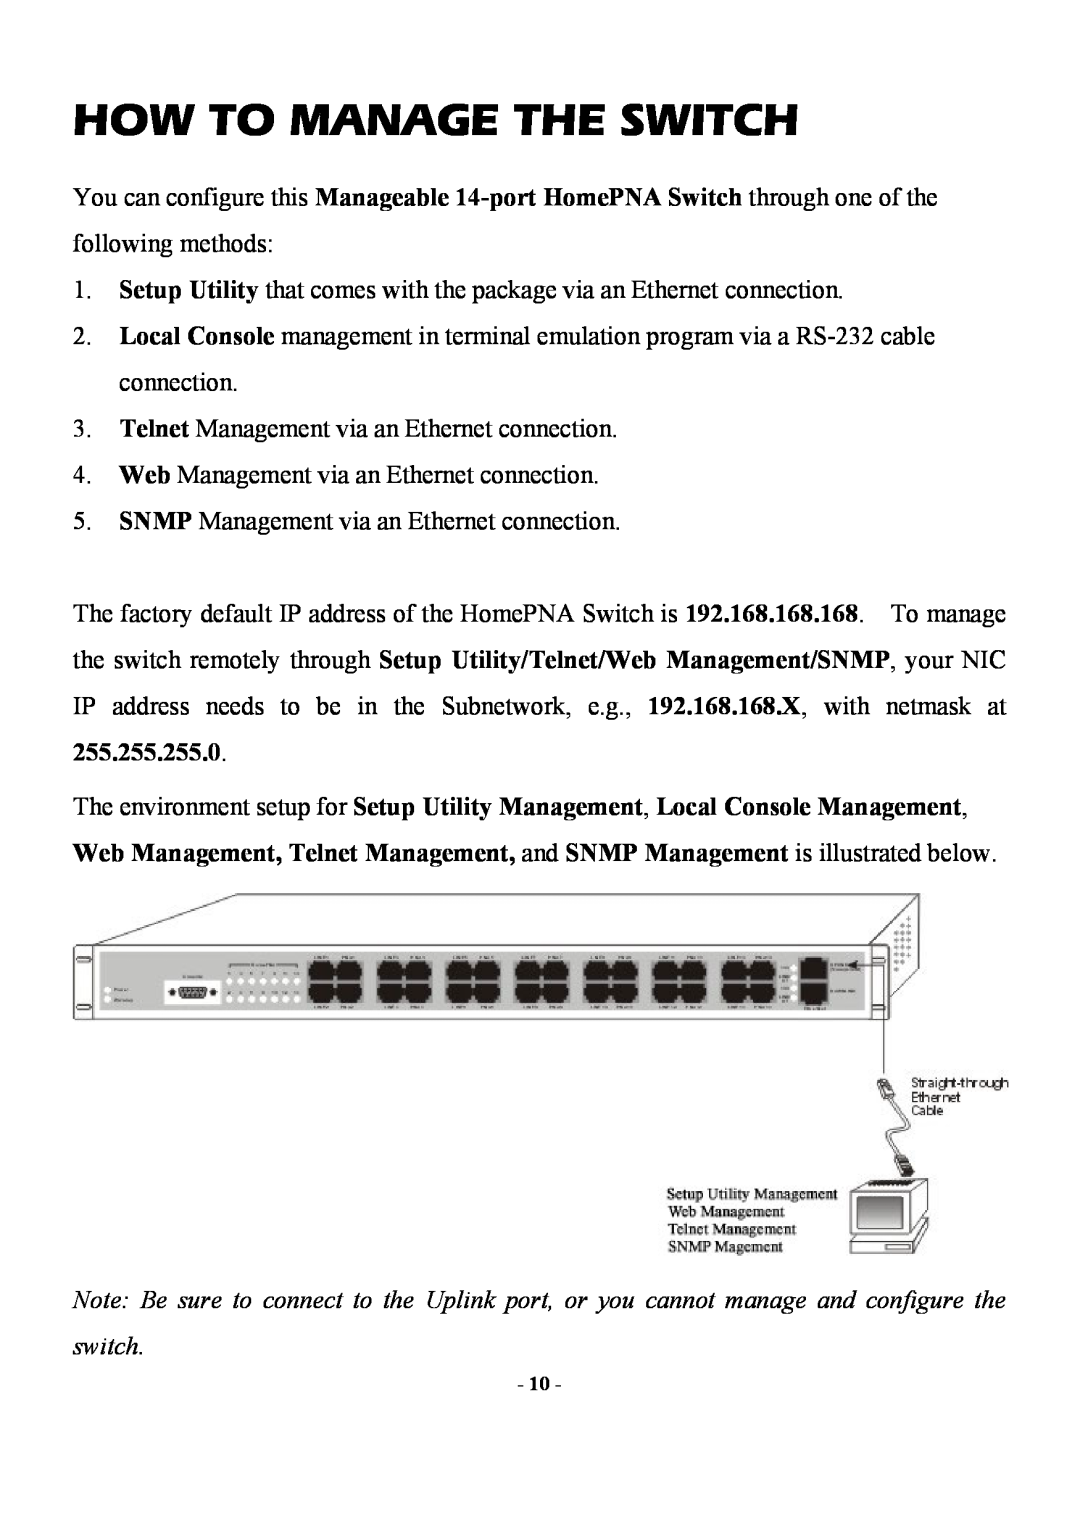 Abocom Manageable 14-port HomePNA Plus 2 Fast Ethernet Switch manual How To Manage The Switch 